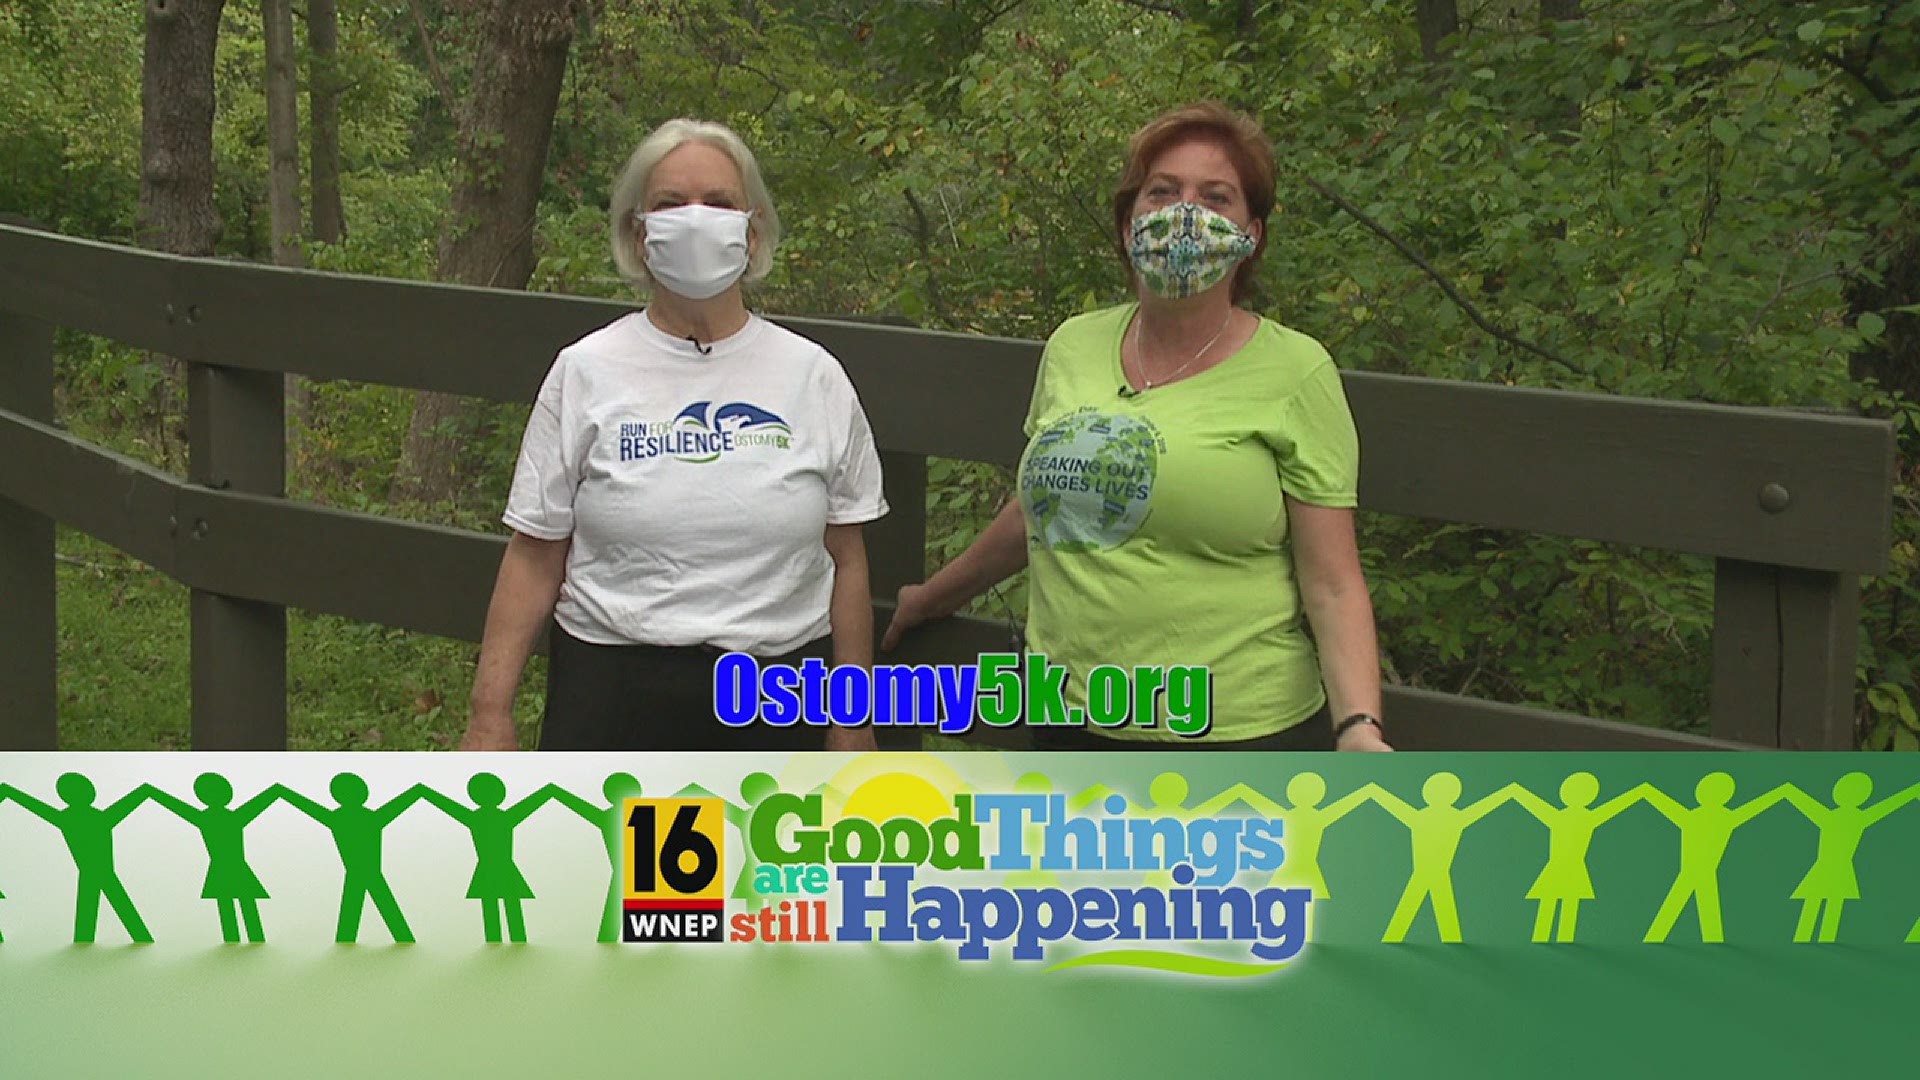 The Run for Resilience Ostomy 5K will be held virtually on October 3rd, 2020.  Register at Ostomy5k.org to show support for Ostomy Awareness.